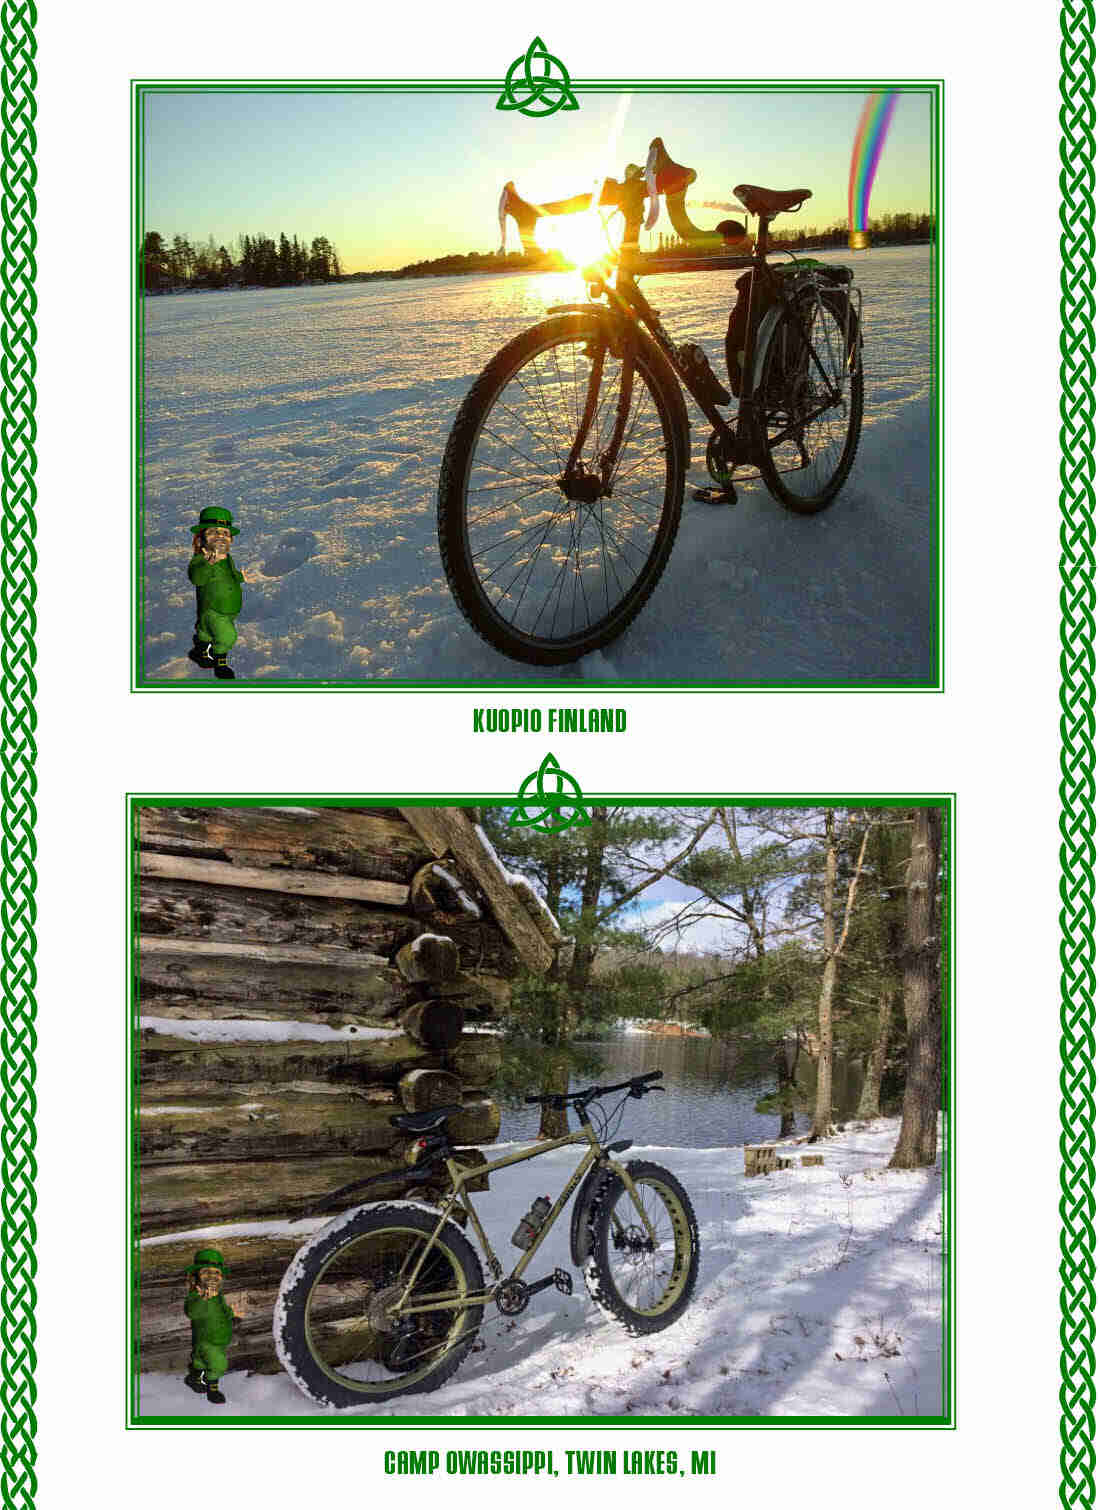 Two images of Surly bikes, with their specific location shown below each image